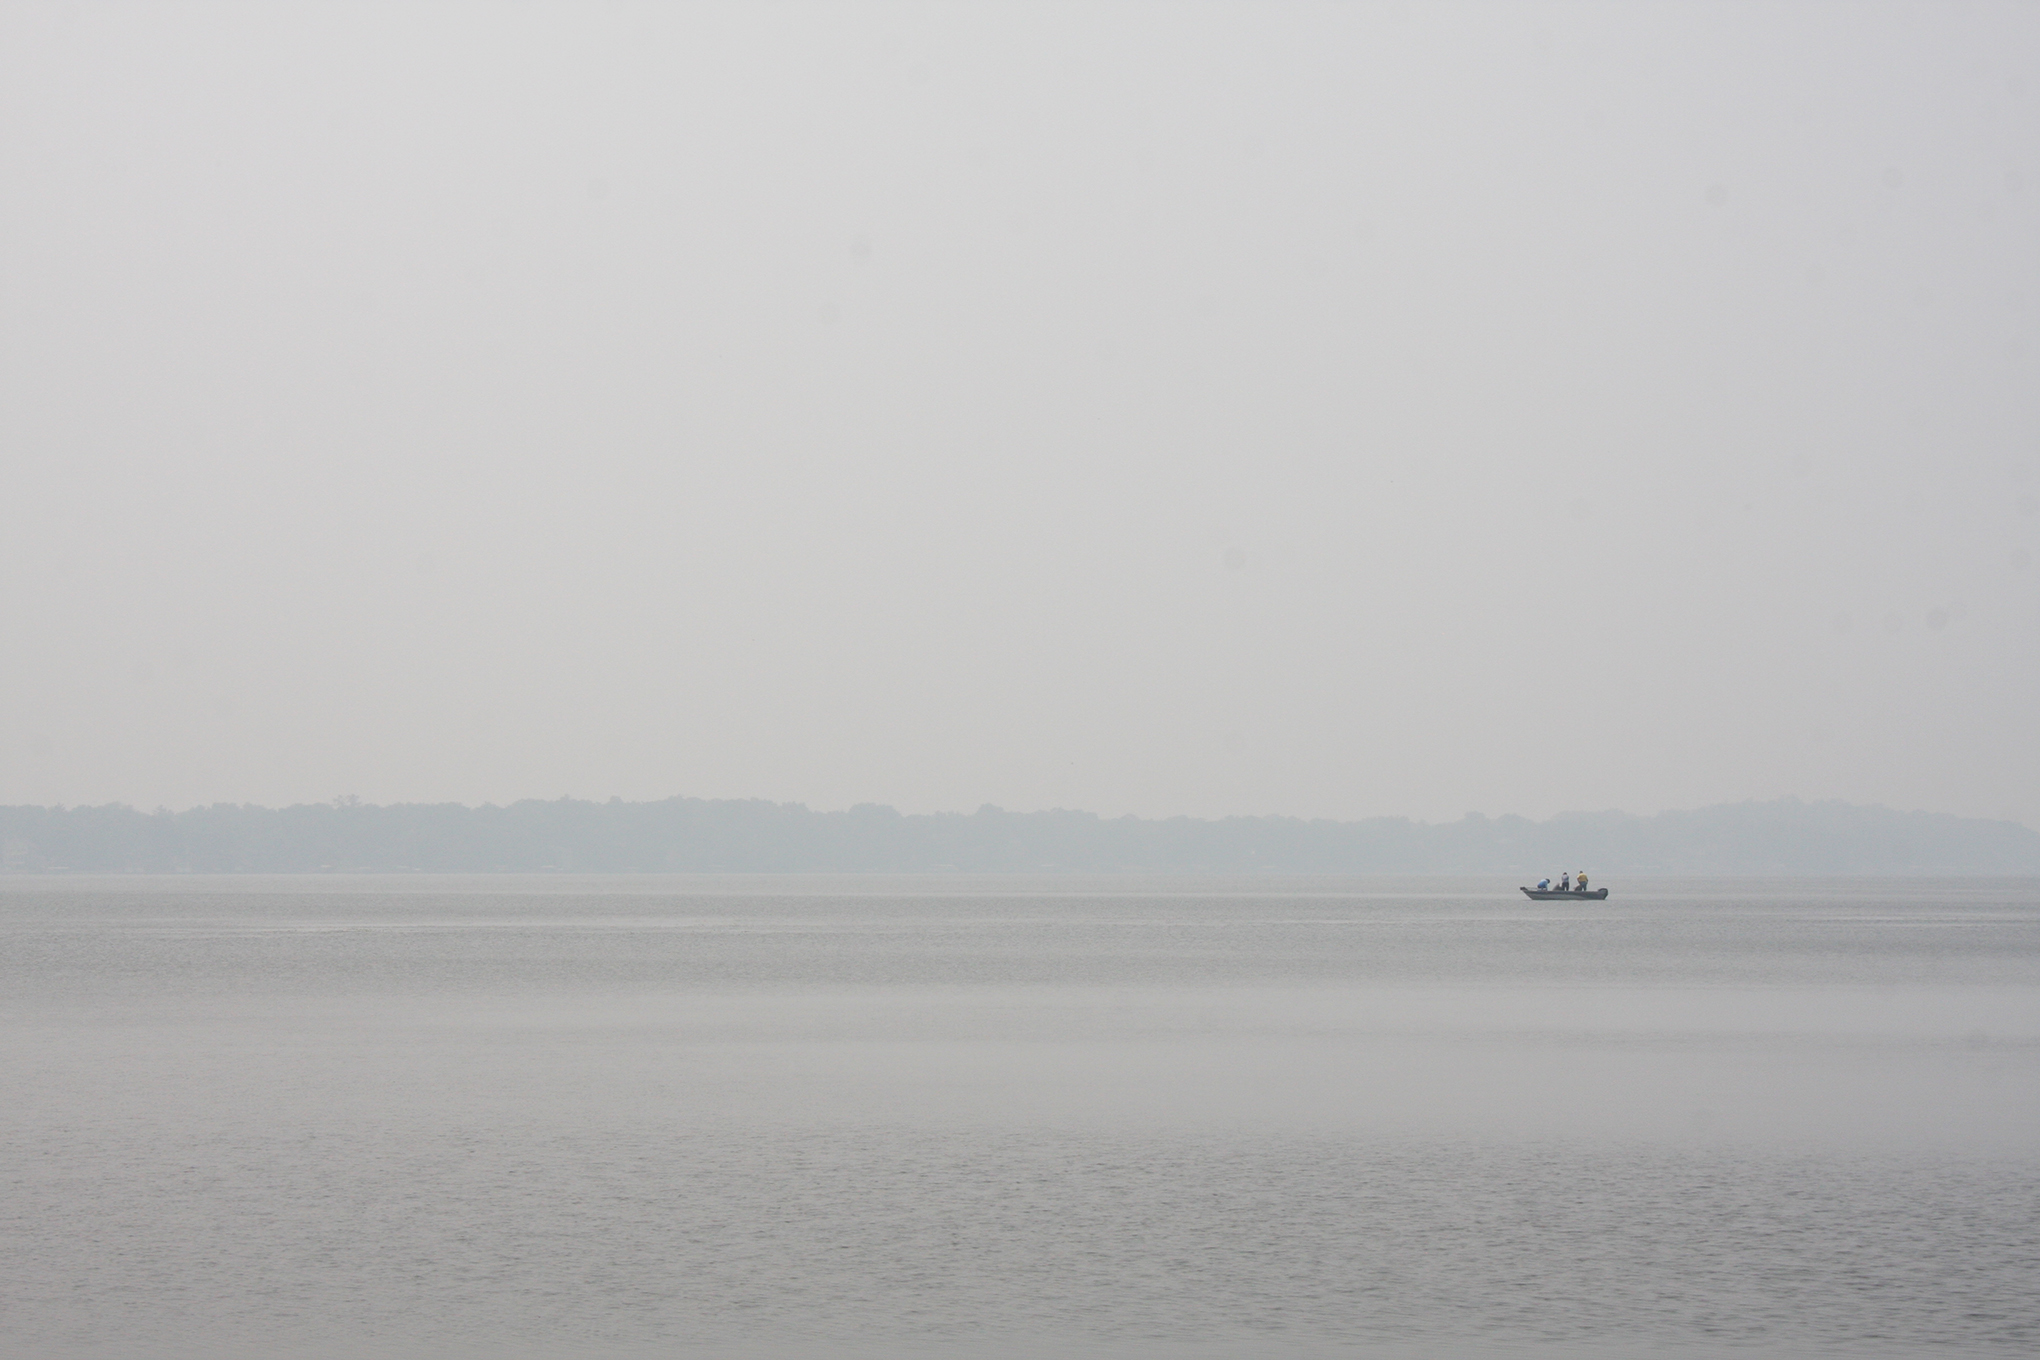 A boat on the water surrounded by a smoky haze caused by wildfires in Canada